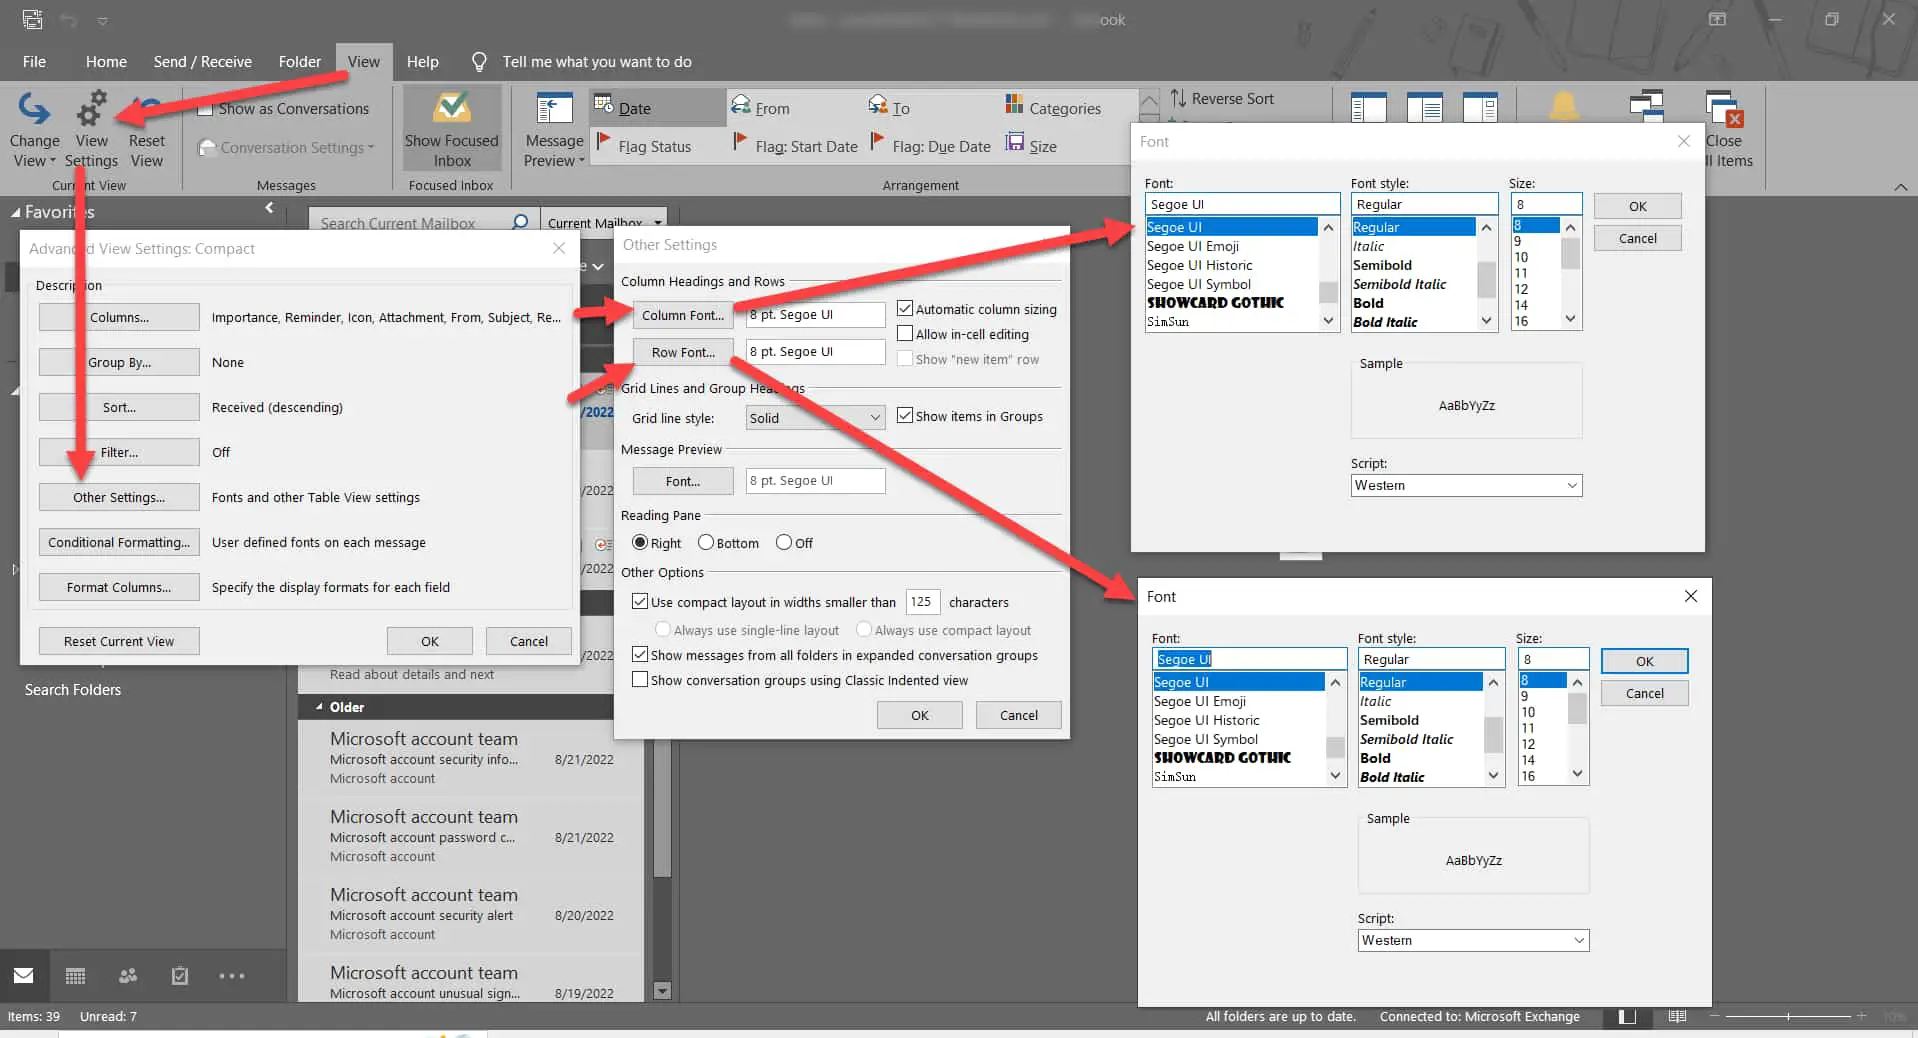 How to switch back to the classic / legacy view outlook